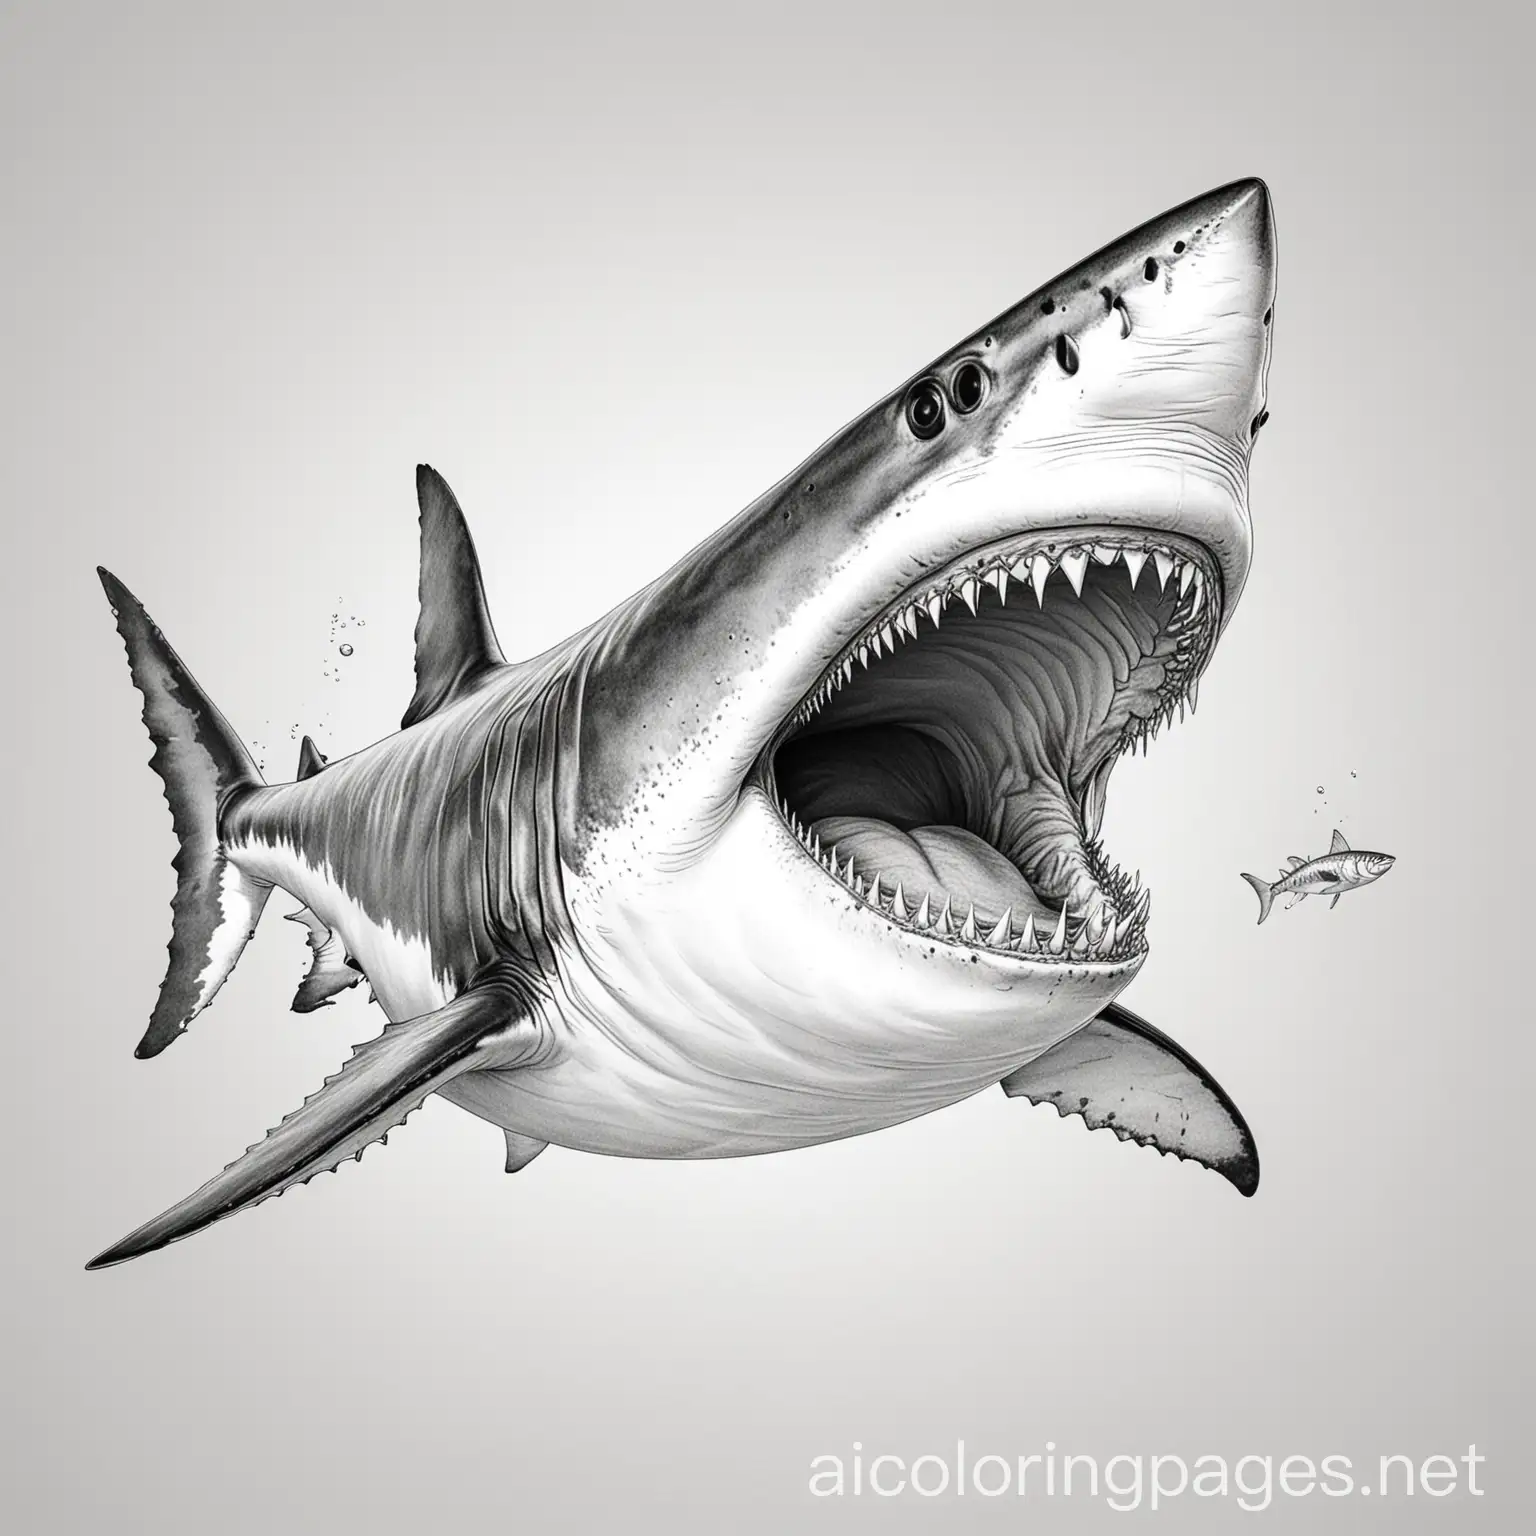 great white shark open mouth with one small fish that does not look like shark near it. the fish is just swimming on top of the shark, Coloring Page, black and white, line art, white background, Simplicity, Ample White Space.